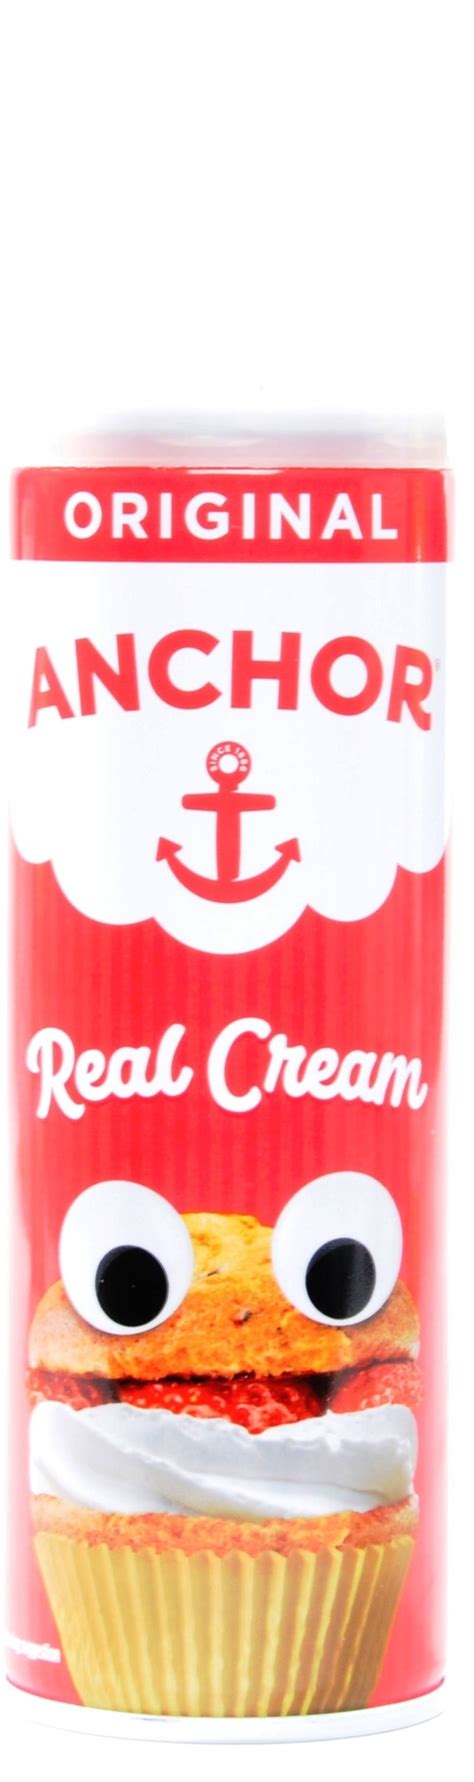 Anchor Squirty Cream Dike And Son